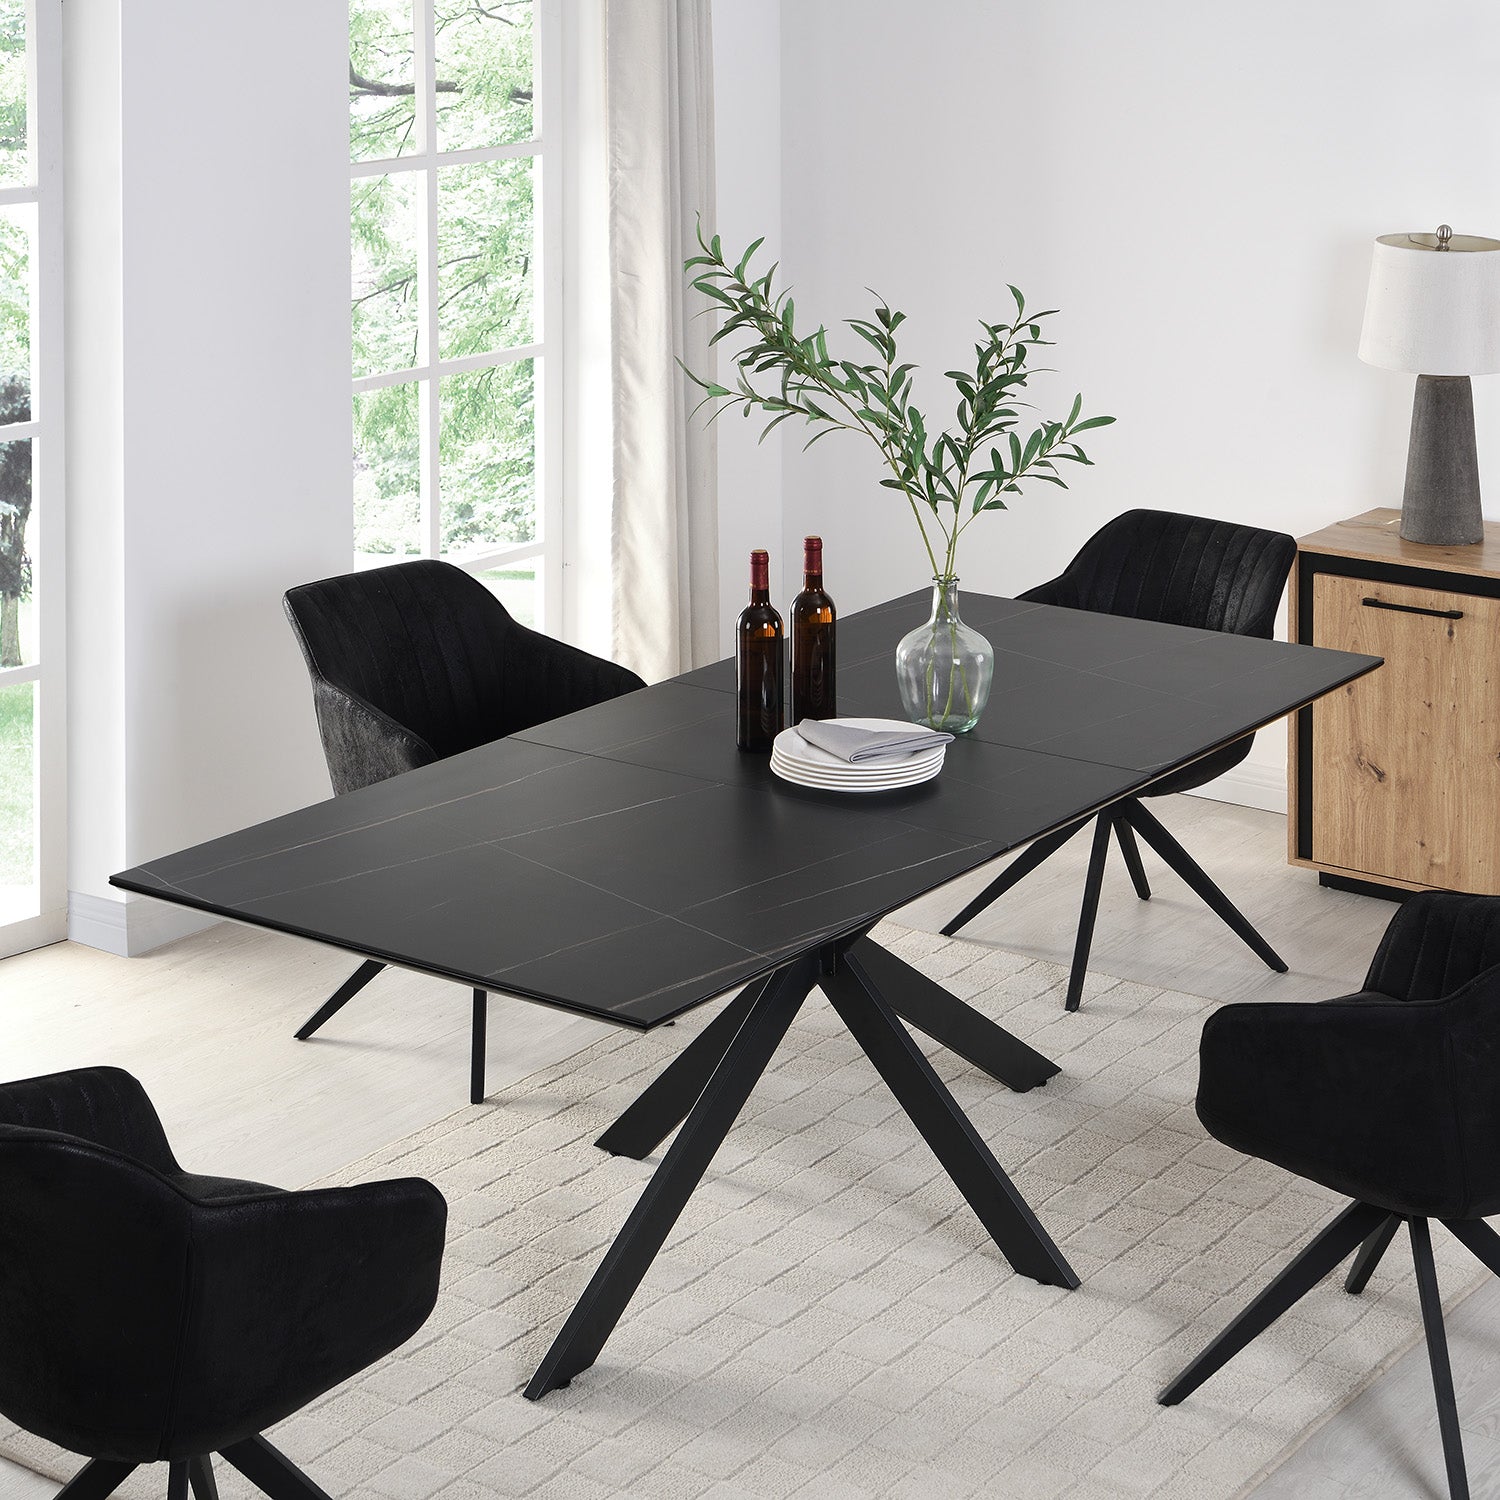 Ceram extensible table with ceramic top